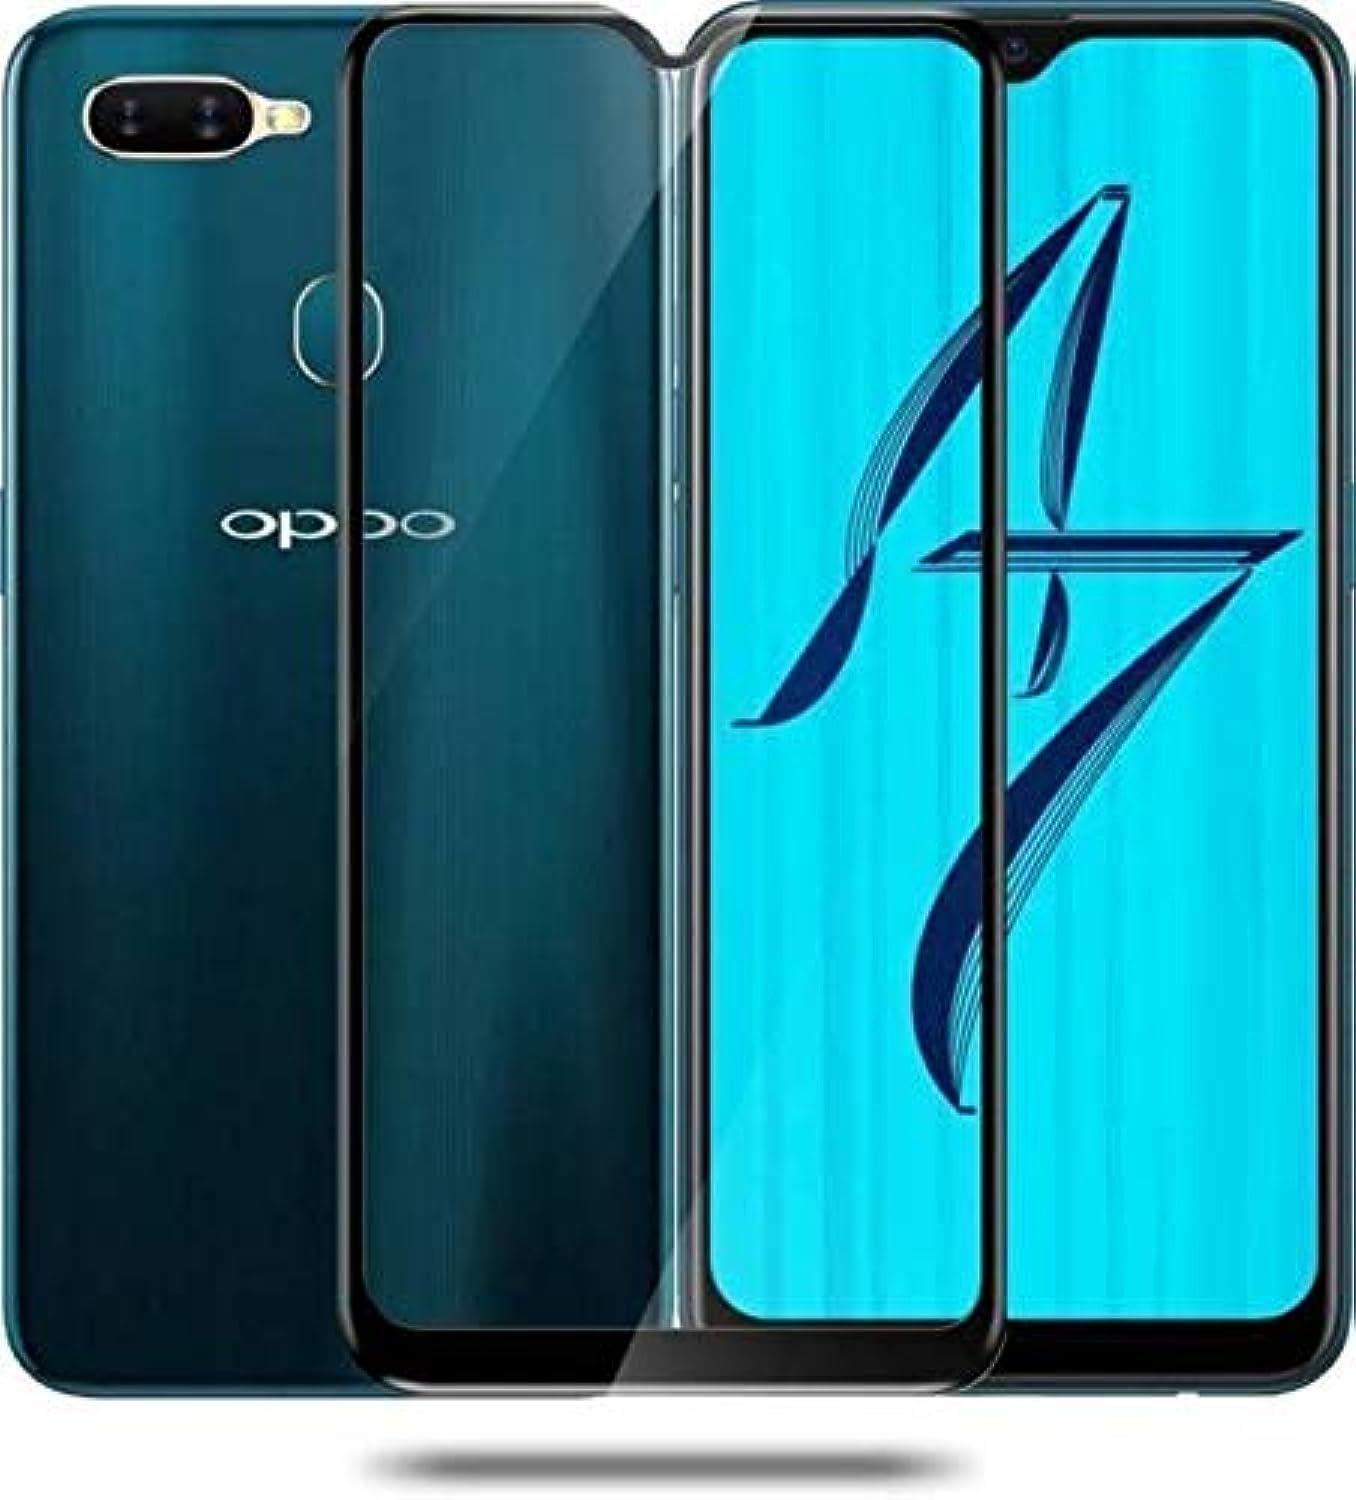 5D Tempered Glass Screen Protector for Oppo A7 - Transparent with Black Frame